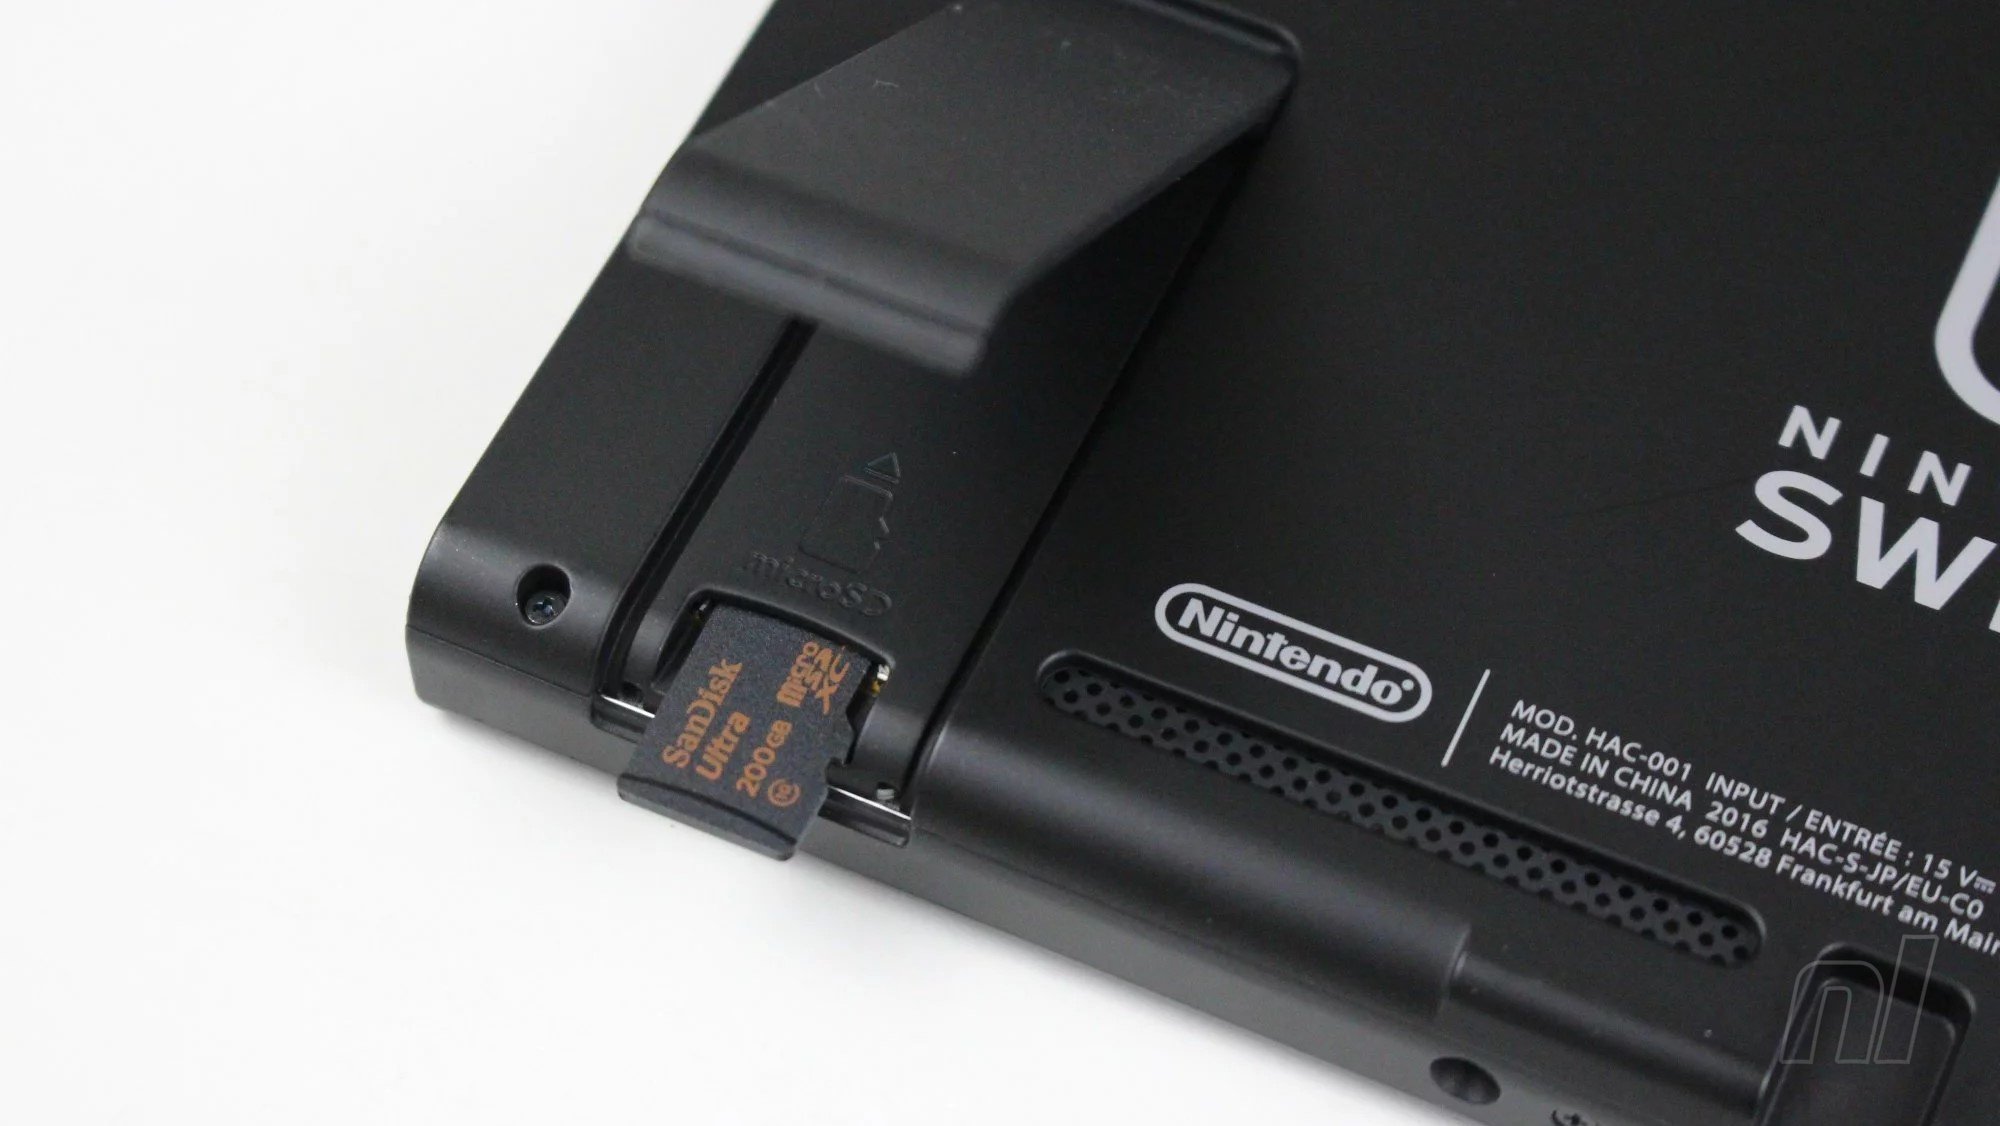 what is the sd card used for nintendo switch